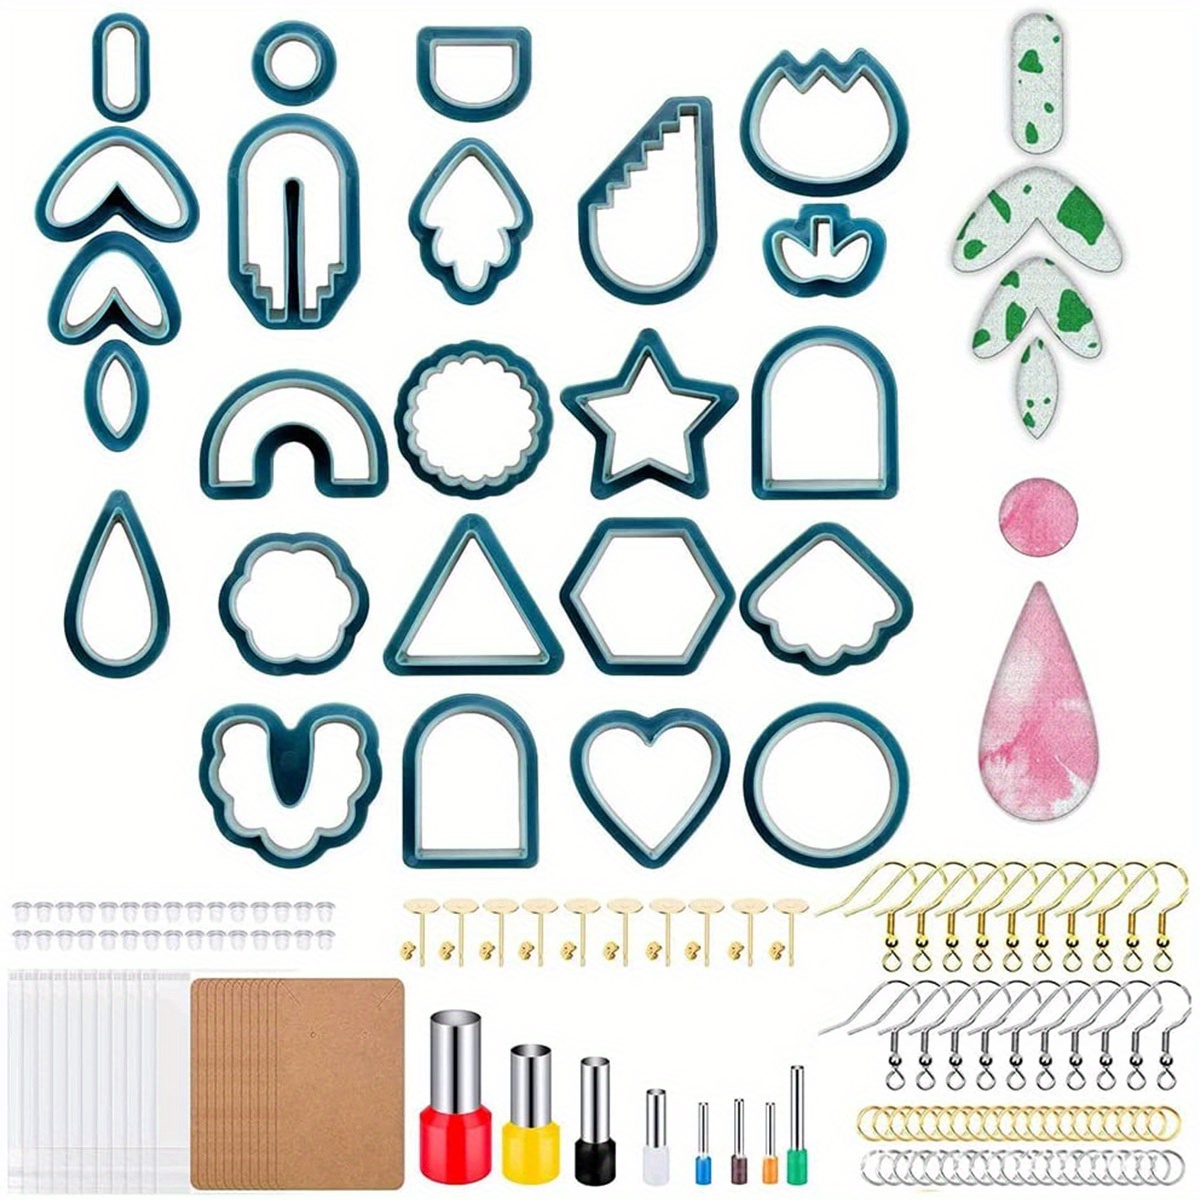 Polymer Clay Cutters DIY Clay Earring Cutters Set for Polymer Clay Jewelry  Making Stainless Steel with 40 Circle Shape Cutters and Earring Accessories